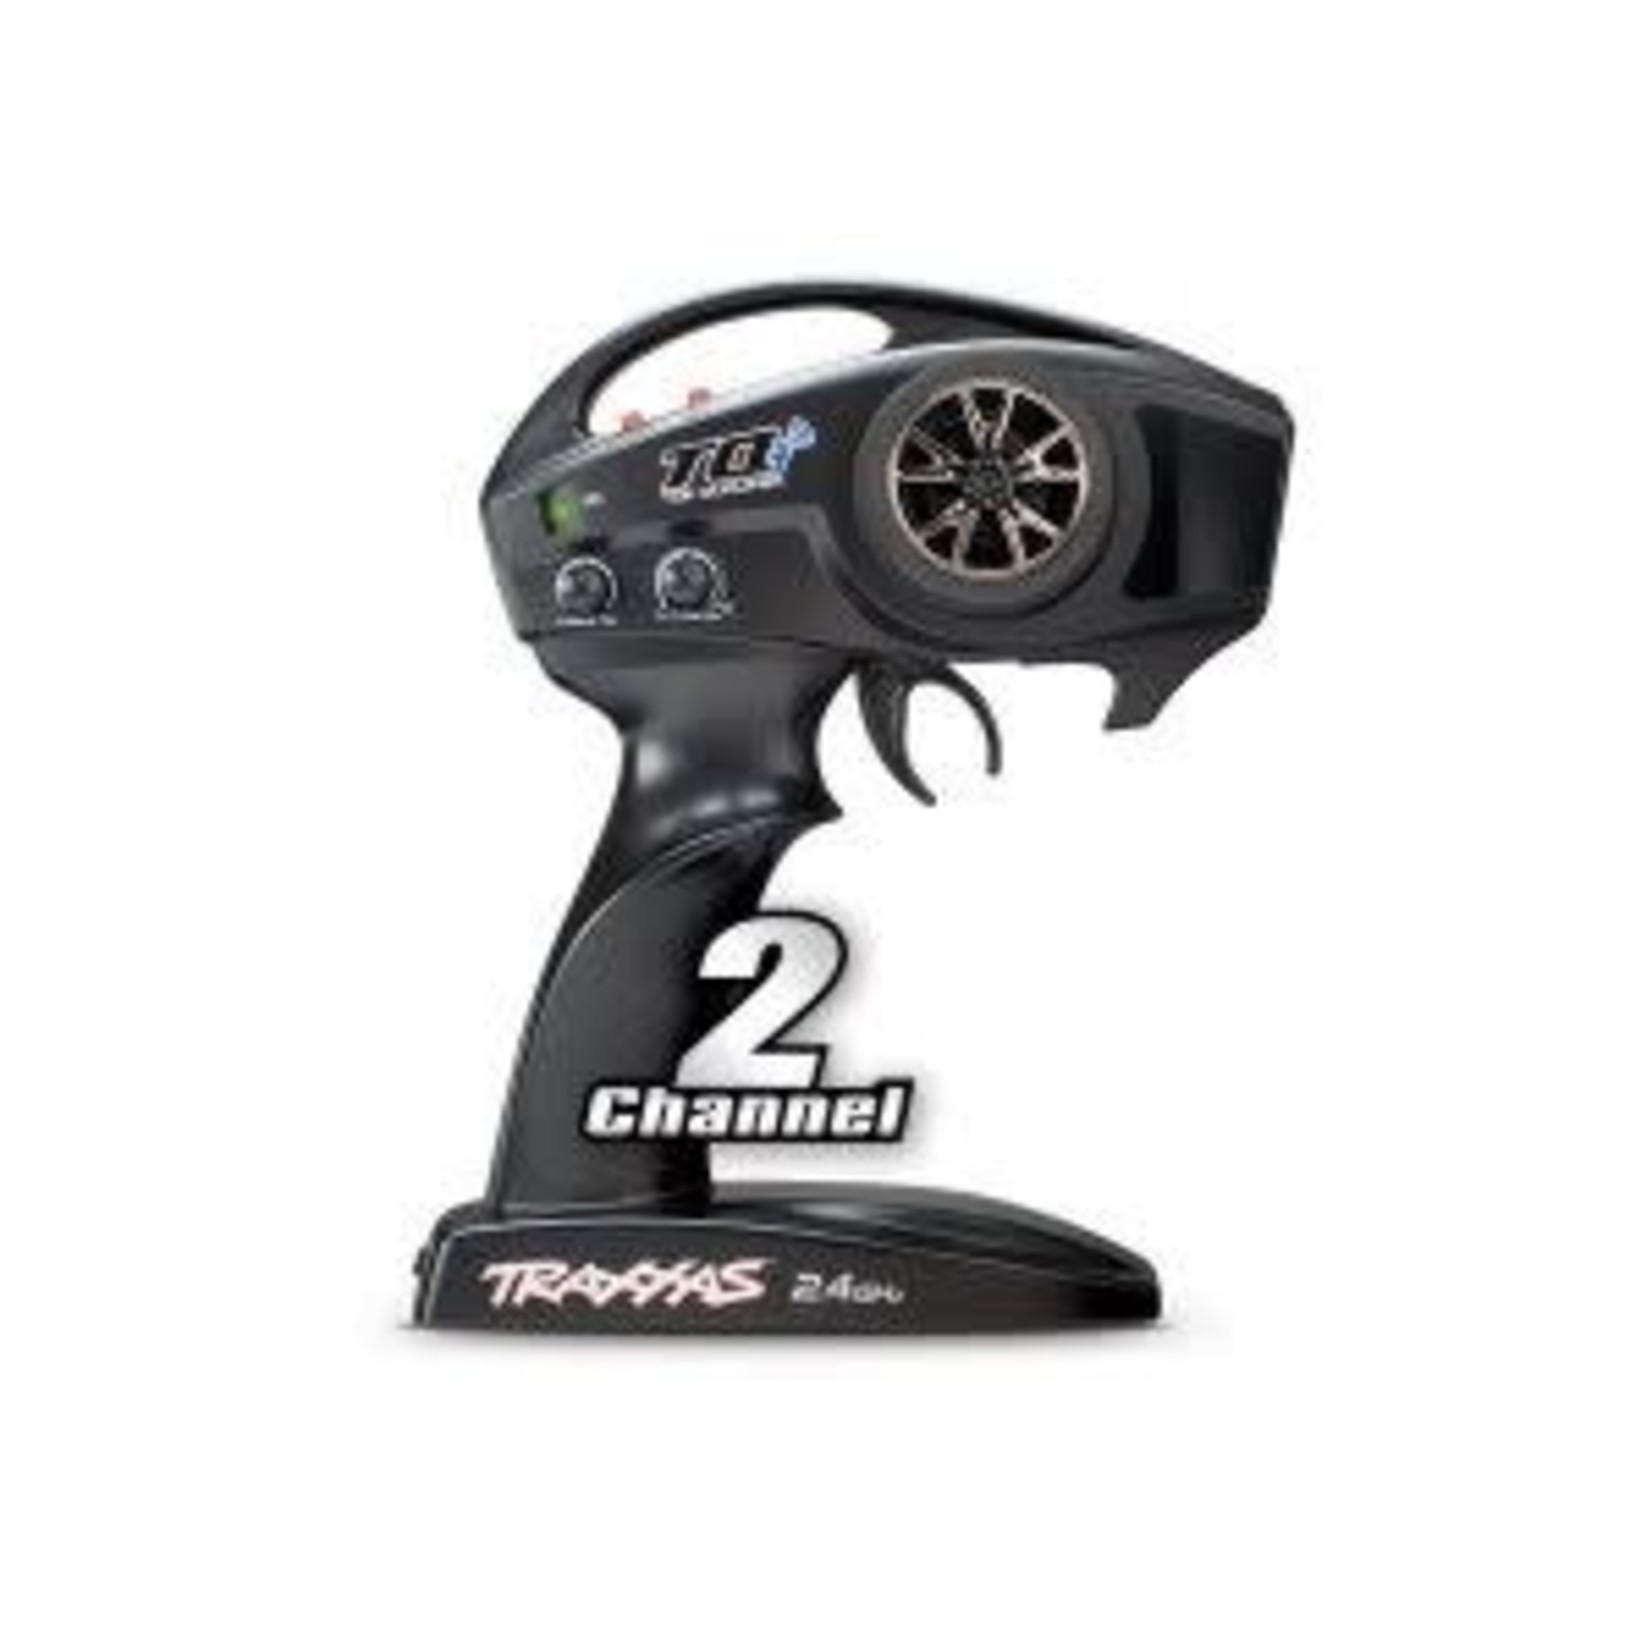 Traxxas 6528 Transmitter, TQi Traxxas Link™ enabled, 2.4GHz high output, 2-channel (transmitter only)